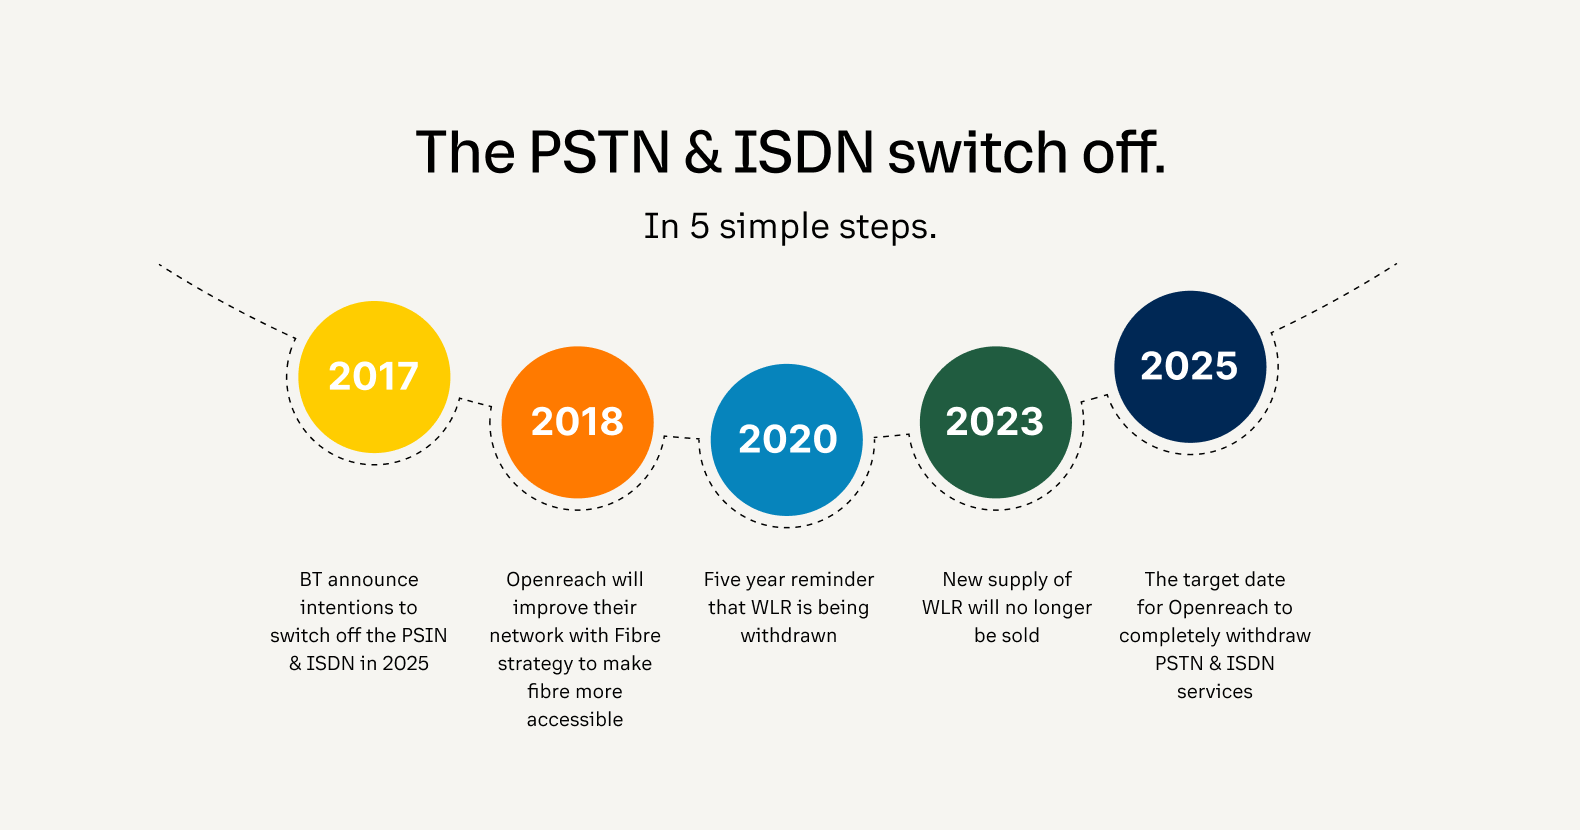 Diagram showing a timeline of the PSTN switch-off